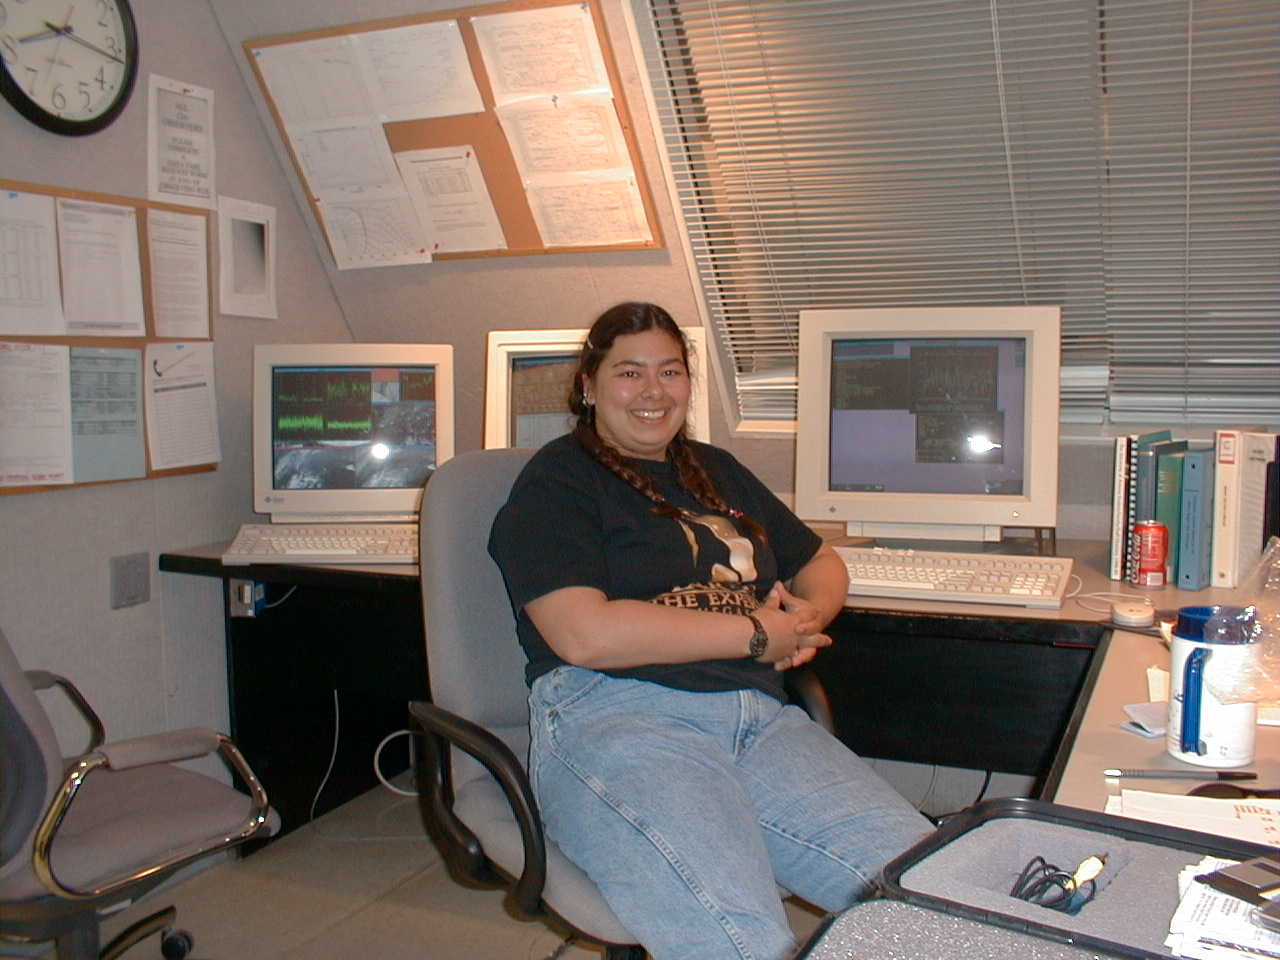 Chandra in the Control Room